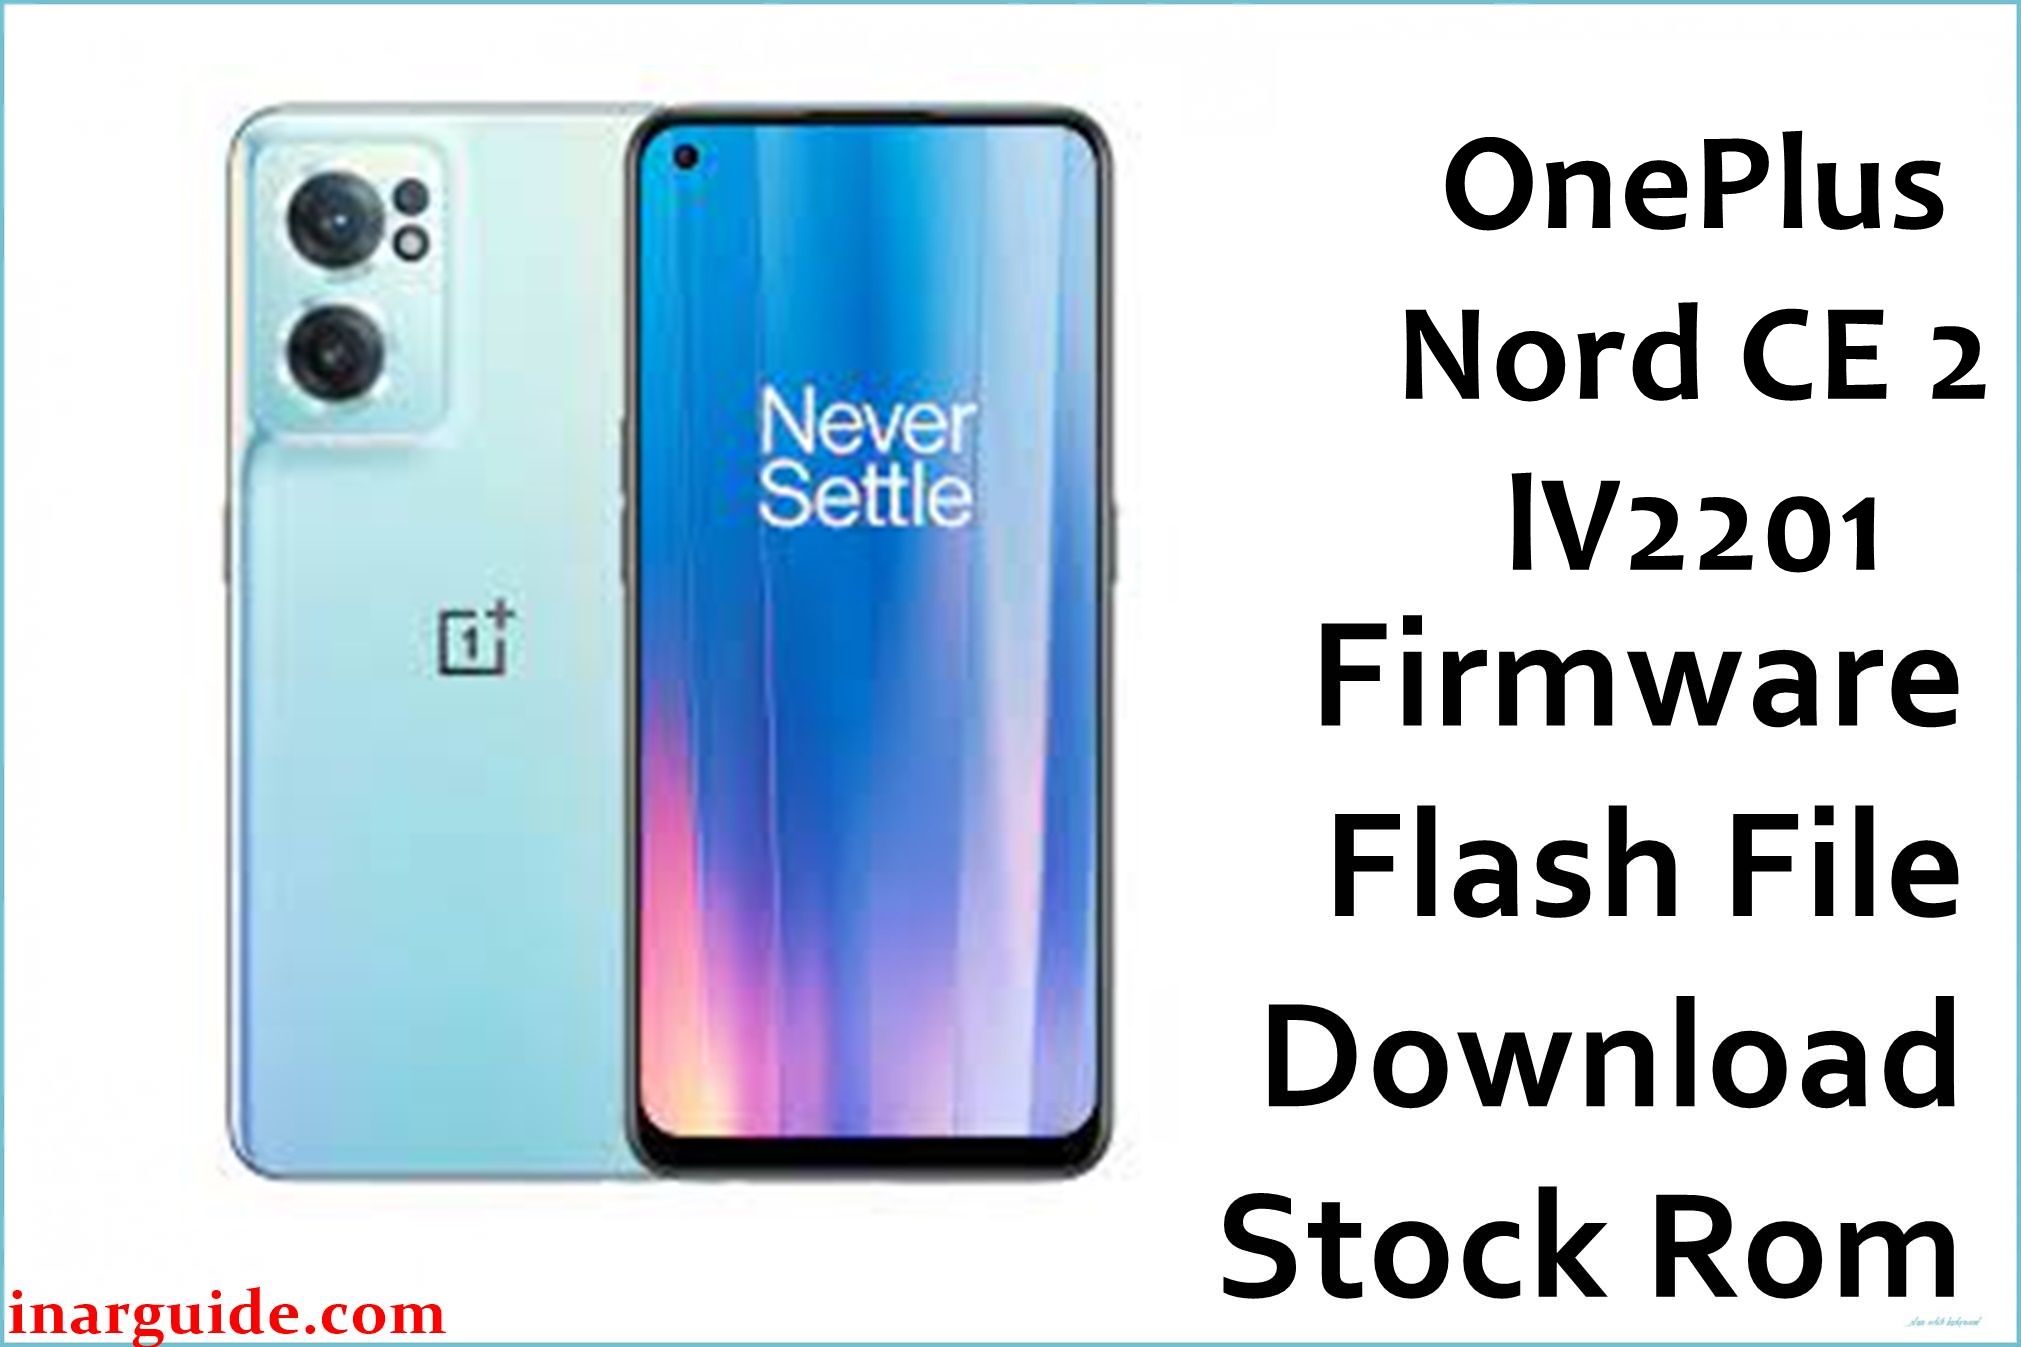 OnePlus Nord CE 2 lV2201